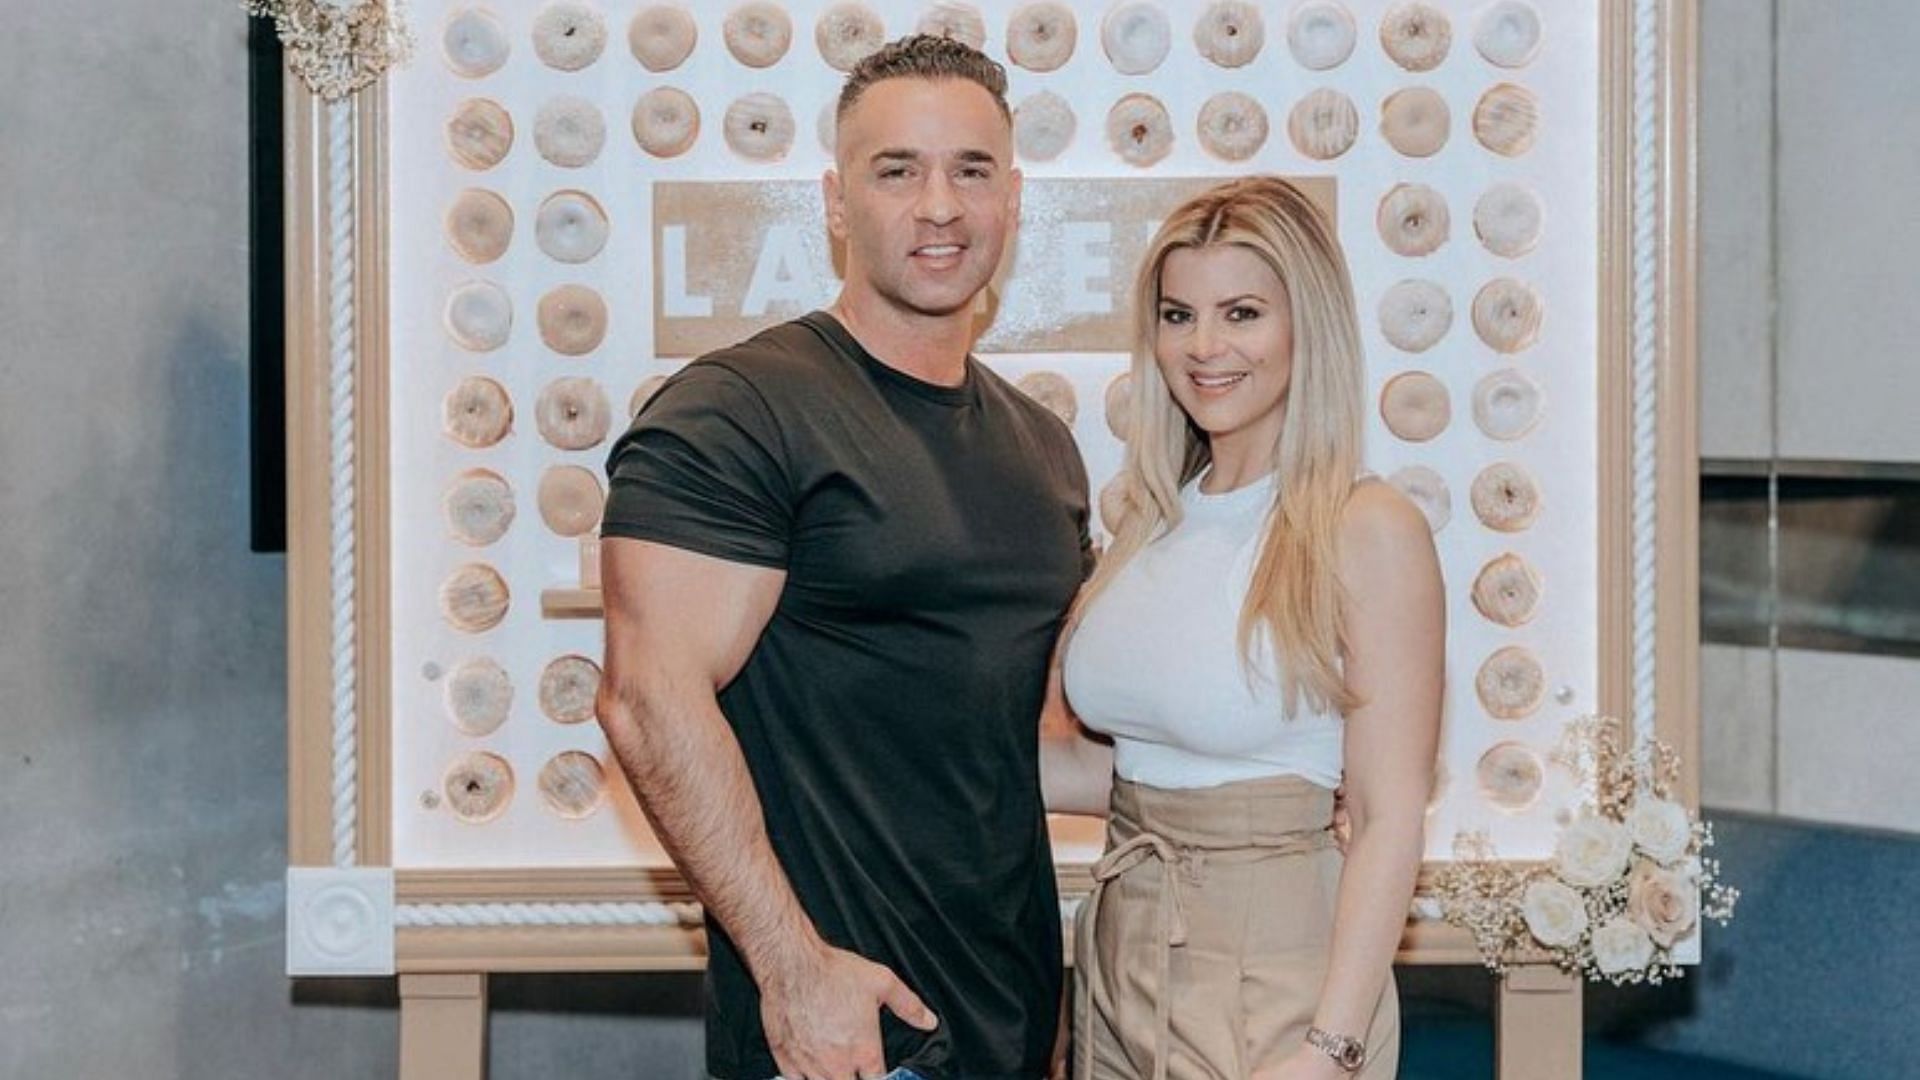 Mike and Lauren (Image via Instagram/@mikethesituation)